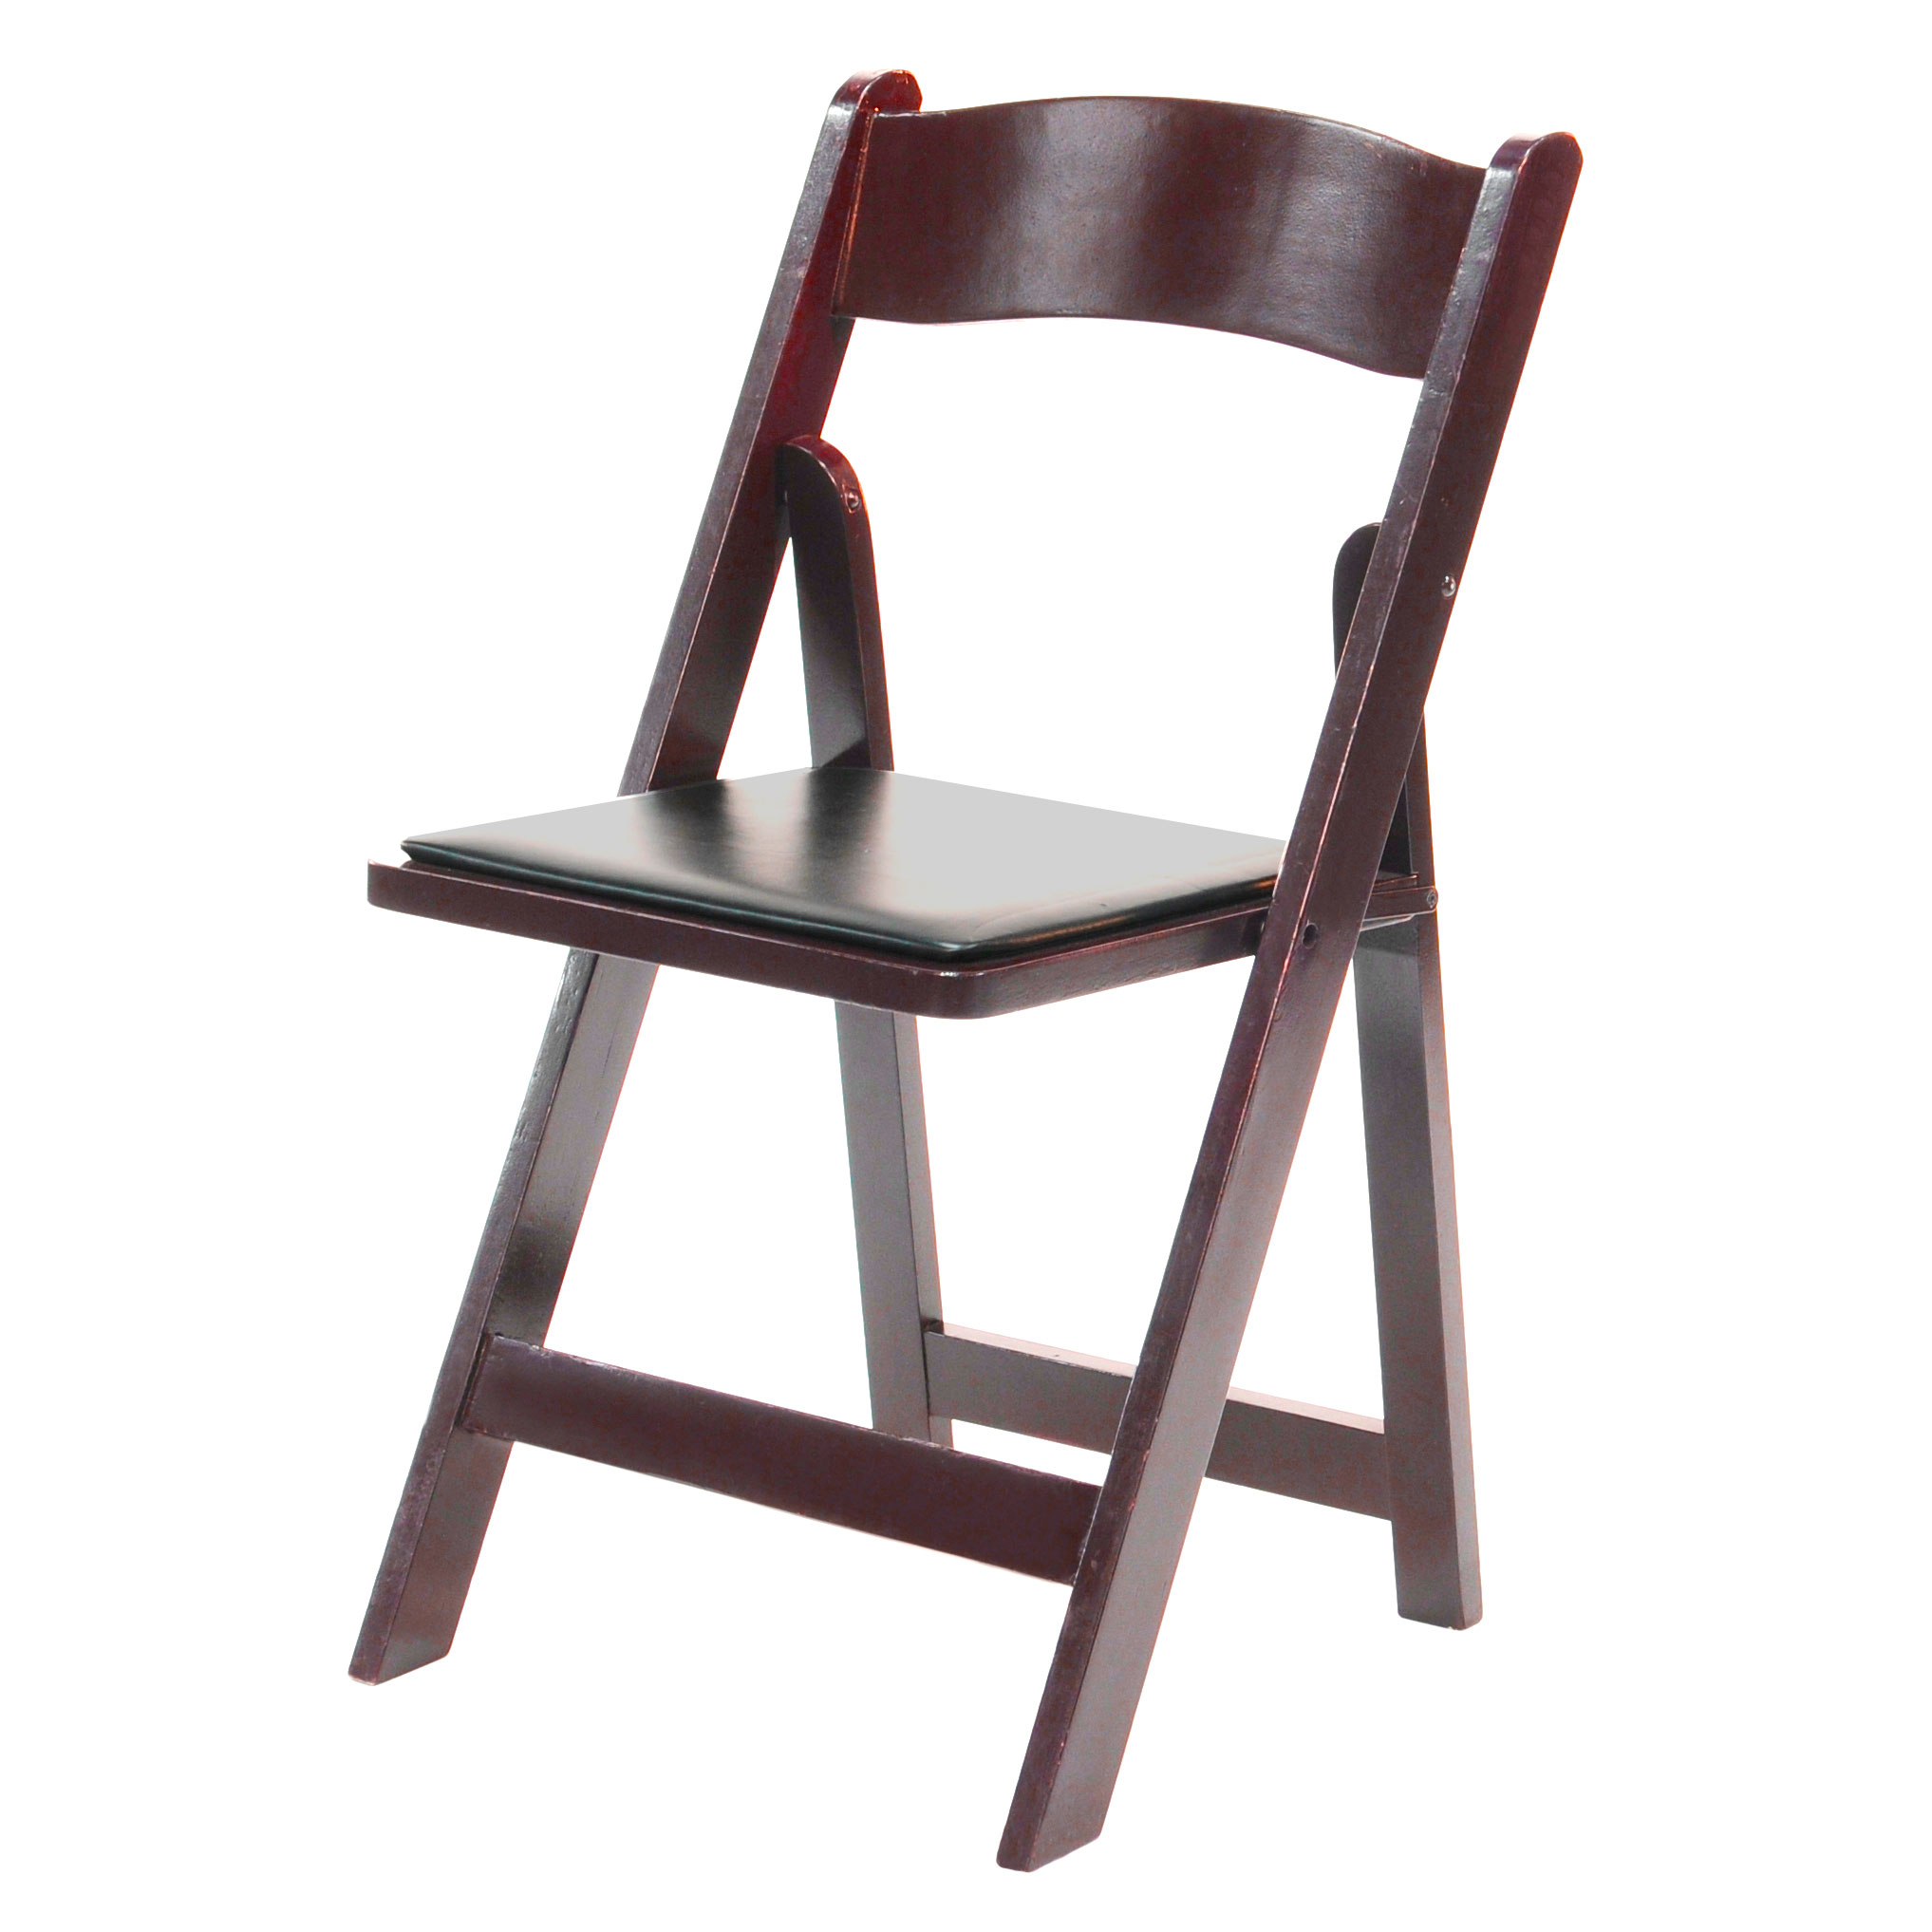 Wood Folding Chair Mahogany Frame, Black Pad  www.Raphaels.com - Call to place your rental order today! 858-689-7368 - www.raphaels.com